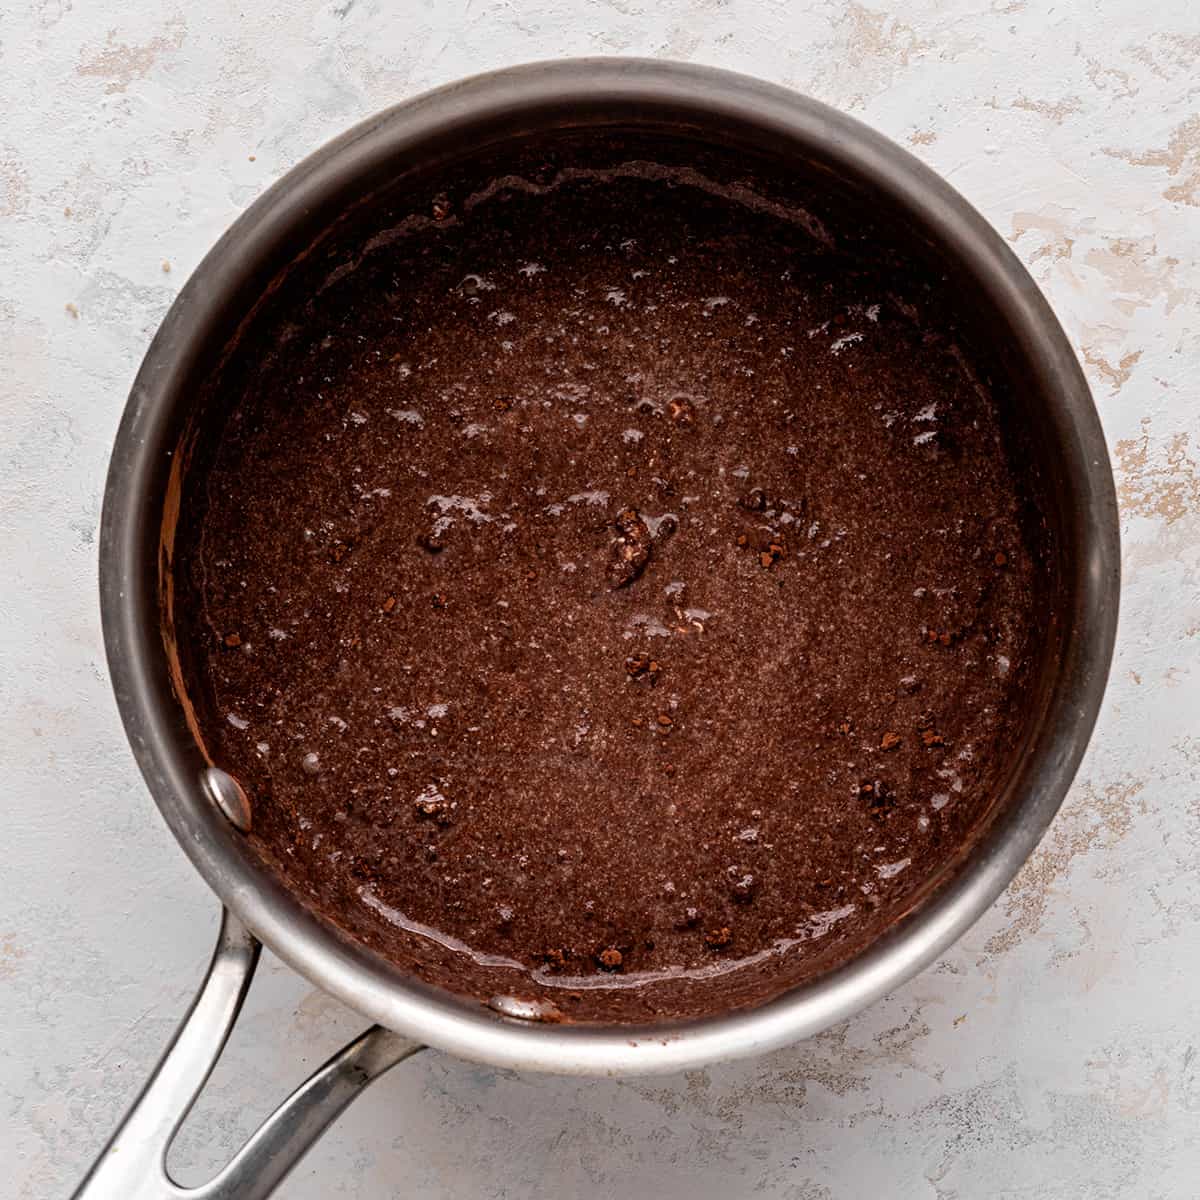 How to Make Chocolate Sauce - ingredients combined and melted in a saucepan